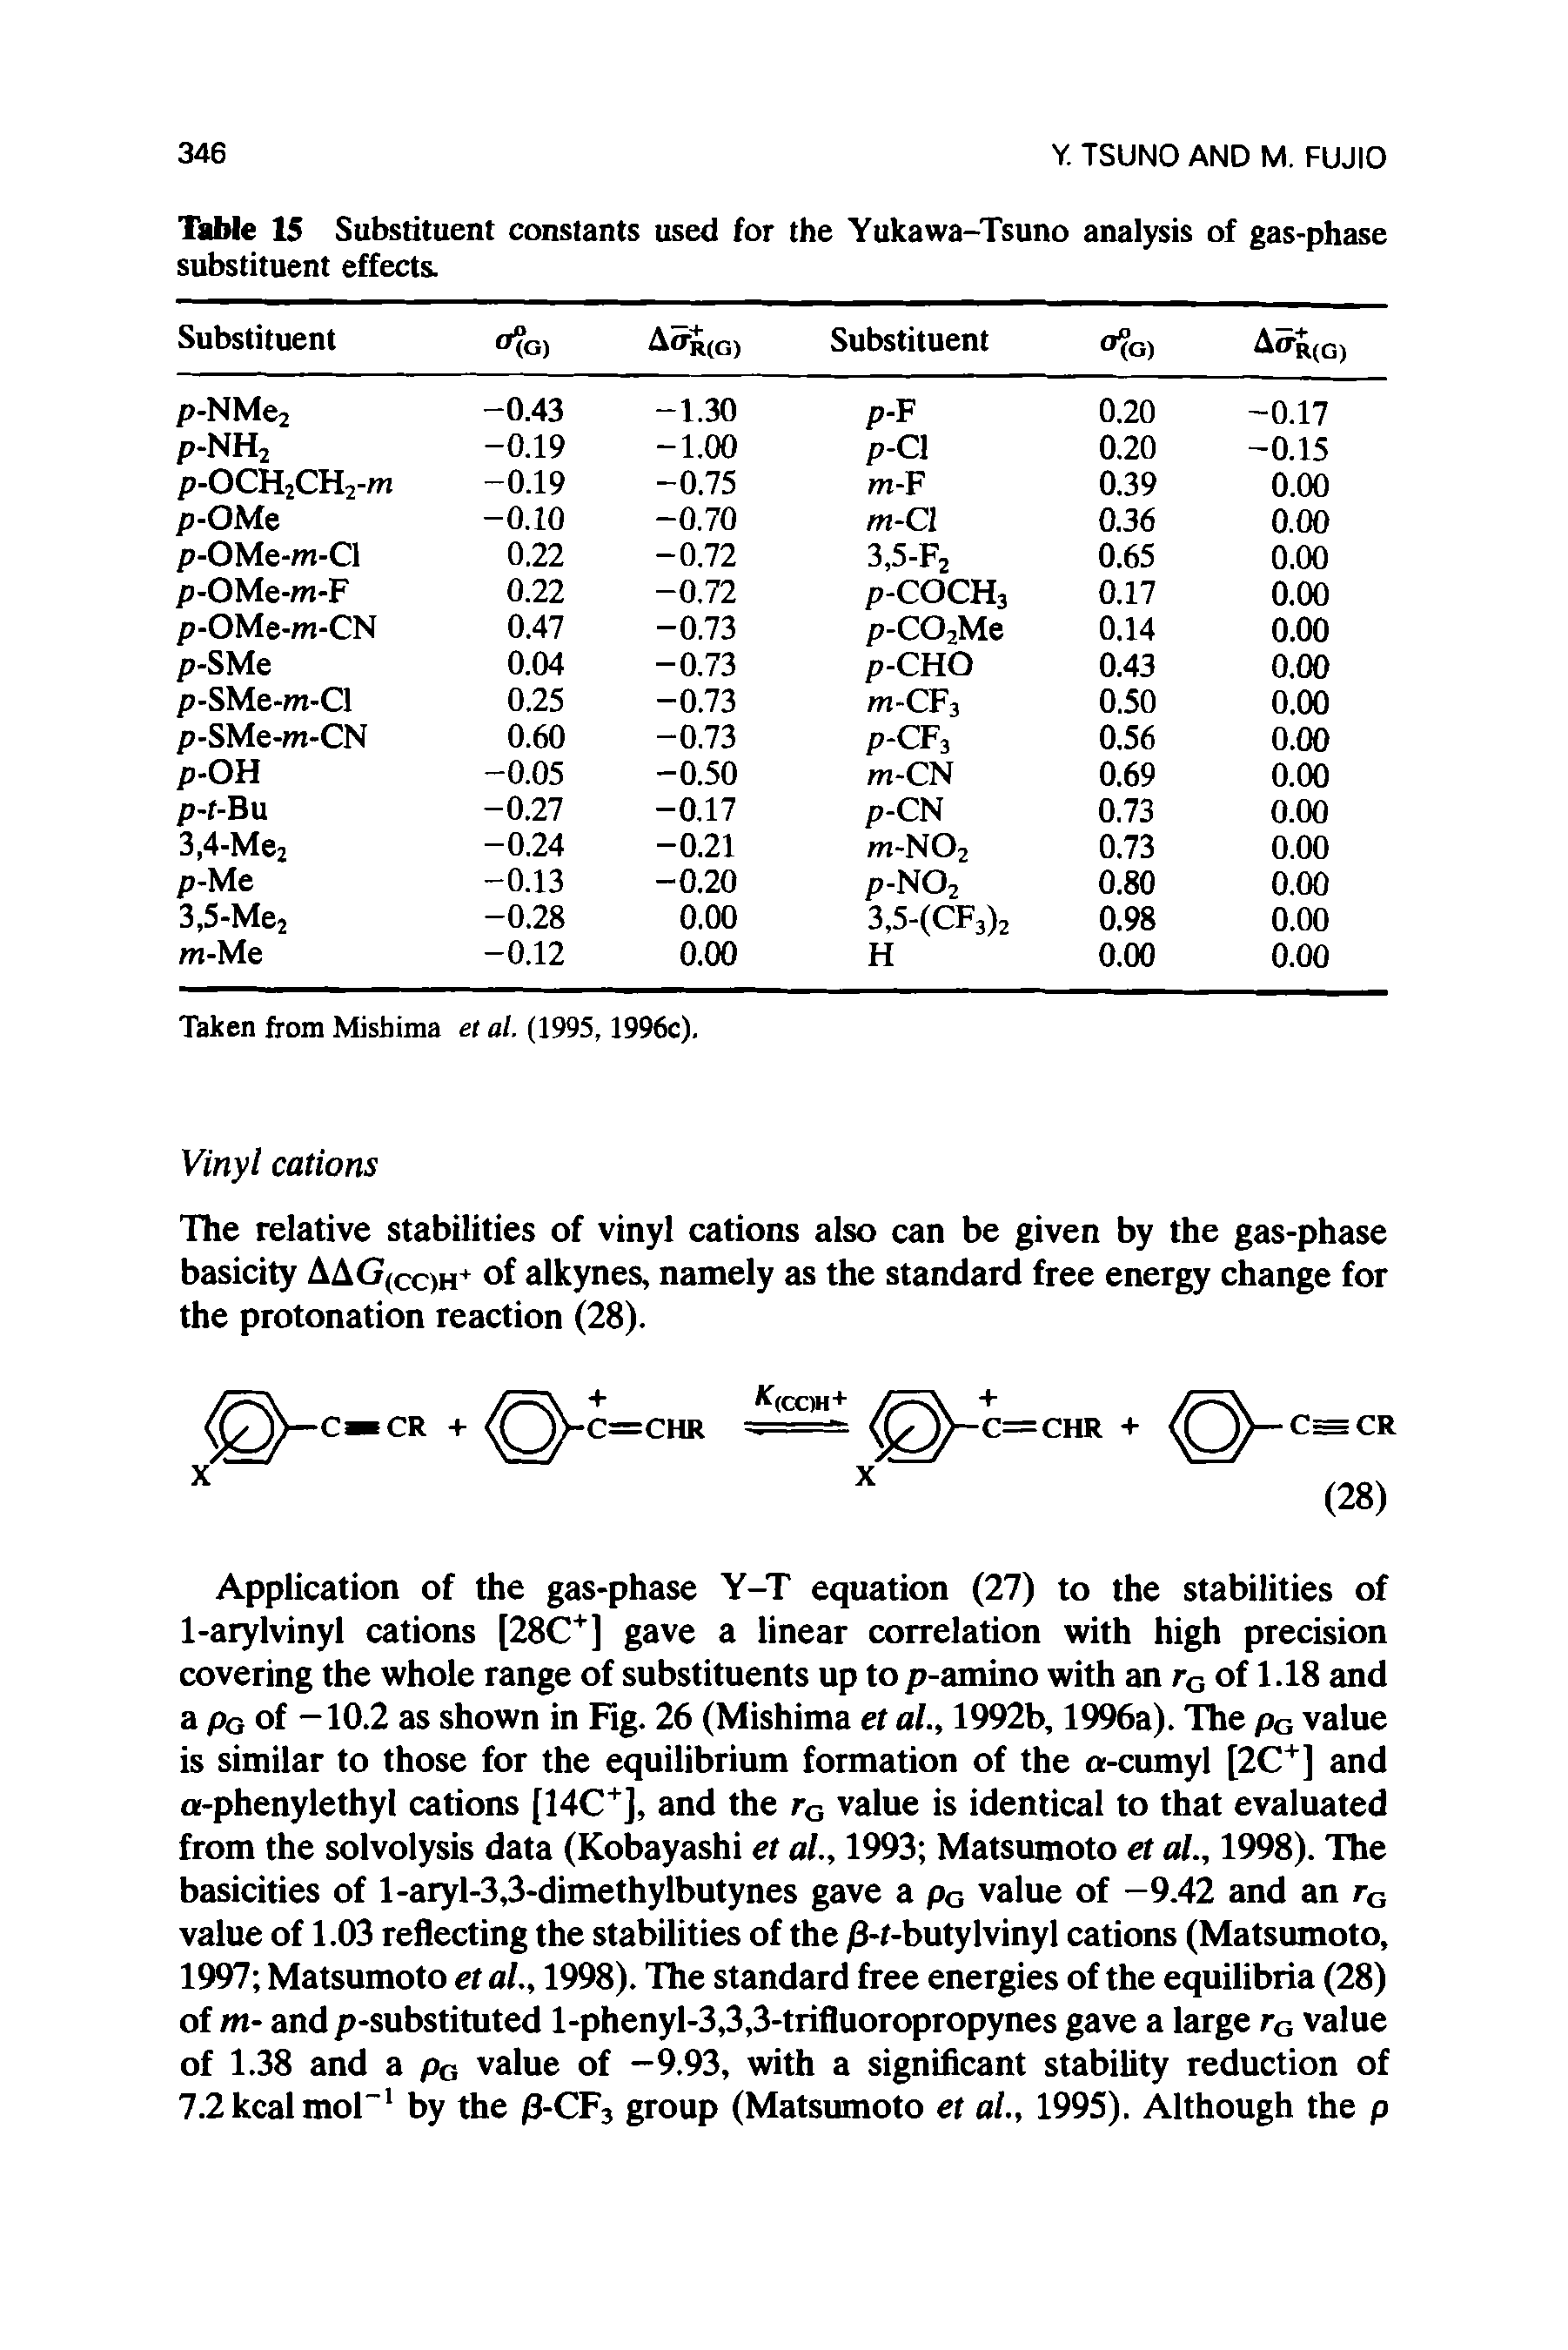 Table 15 Substituent constants used for the Yukawa-Tsuno analysis of gas-phase substituent effects.